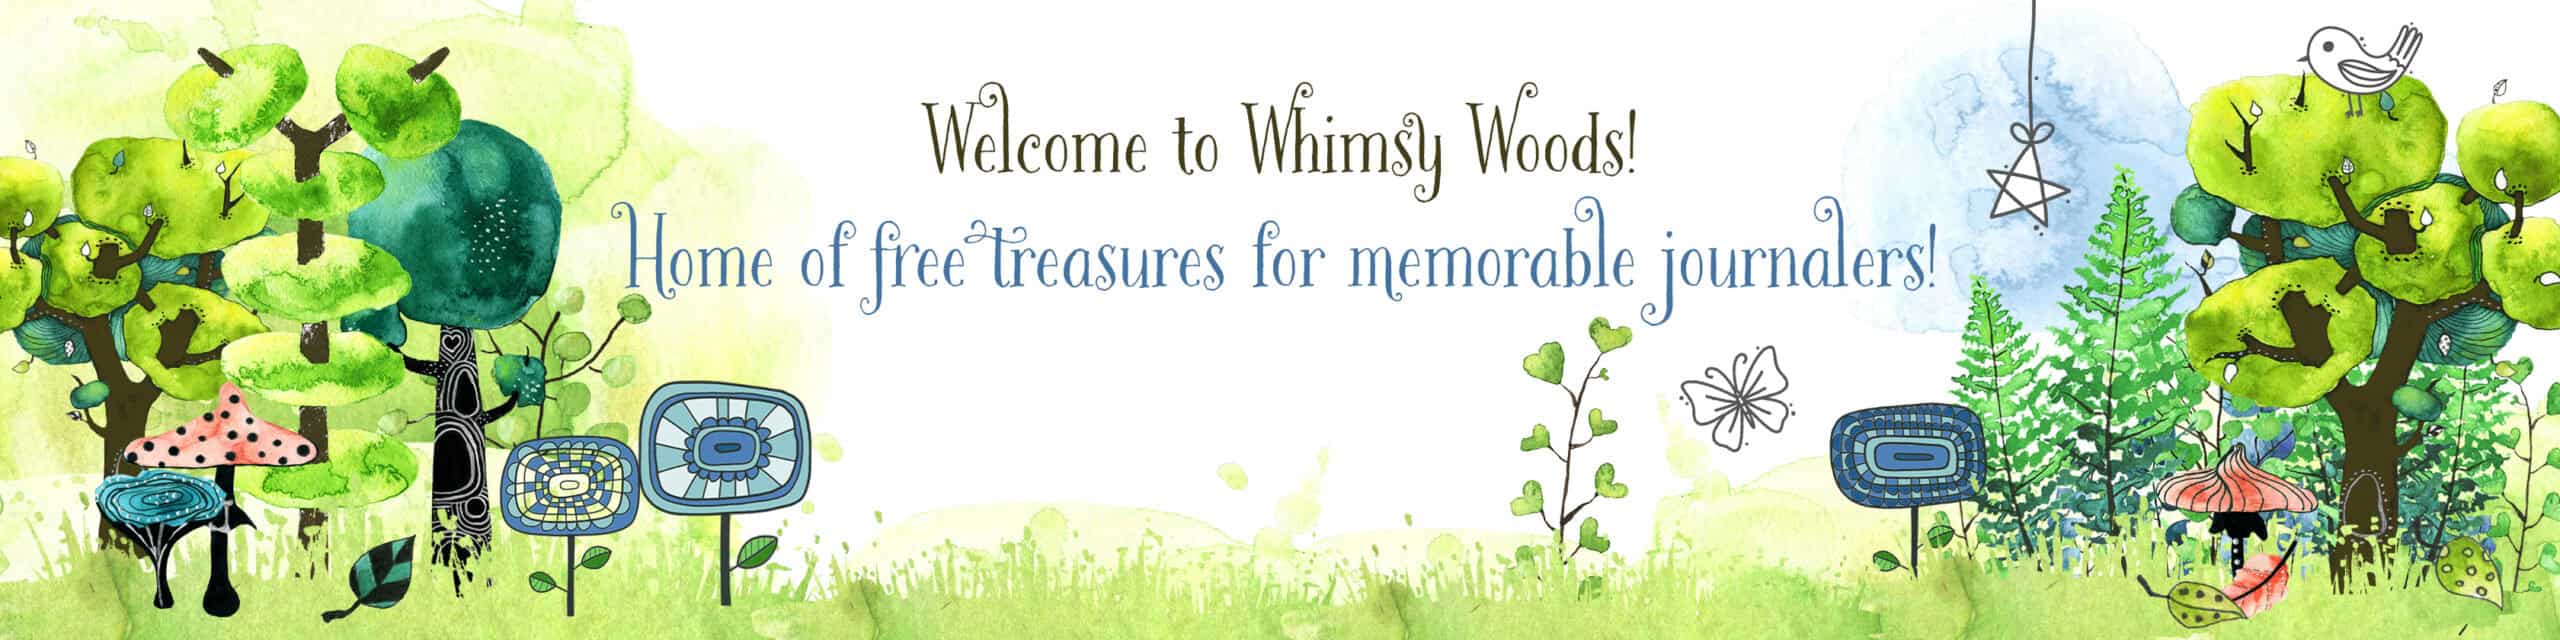 banner that says: Welcome to Whimsy Woods. Home of free treasures for memorable journalers. A whimsical forest scene decorates this banner.